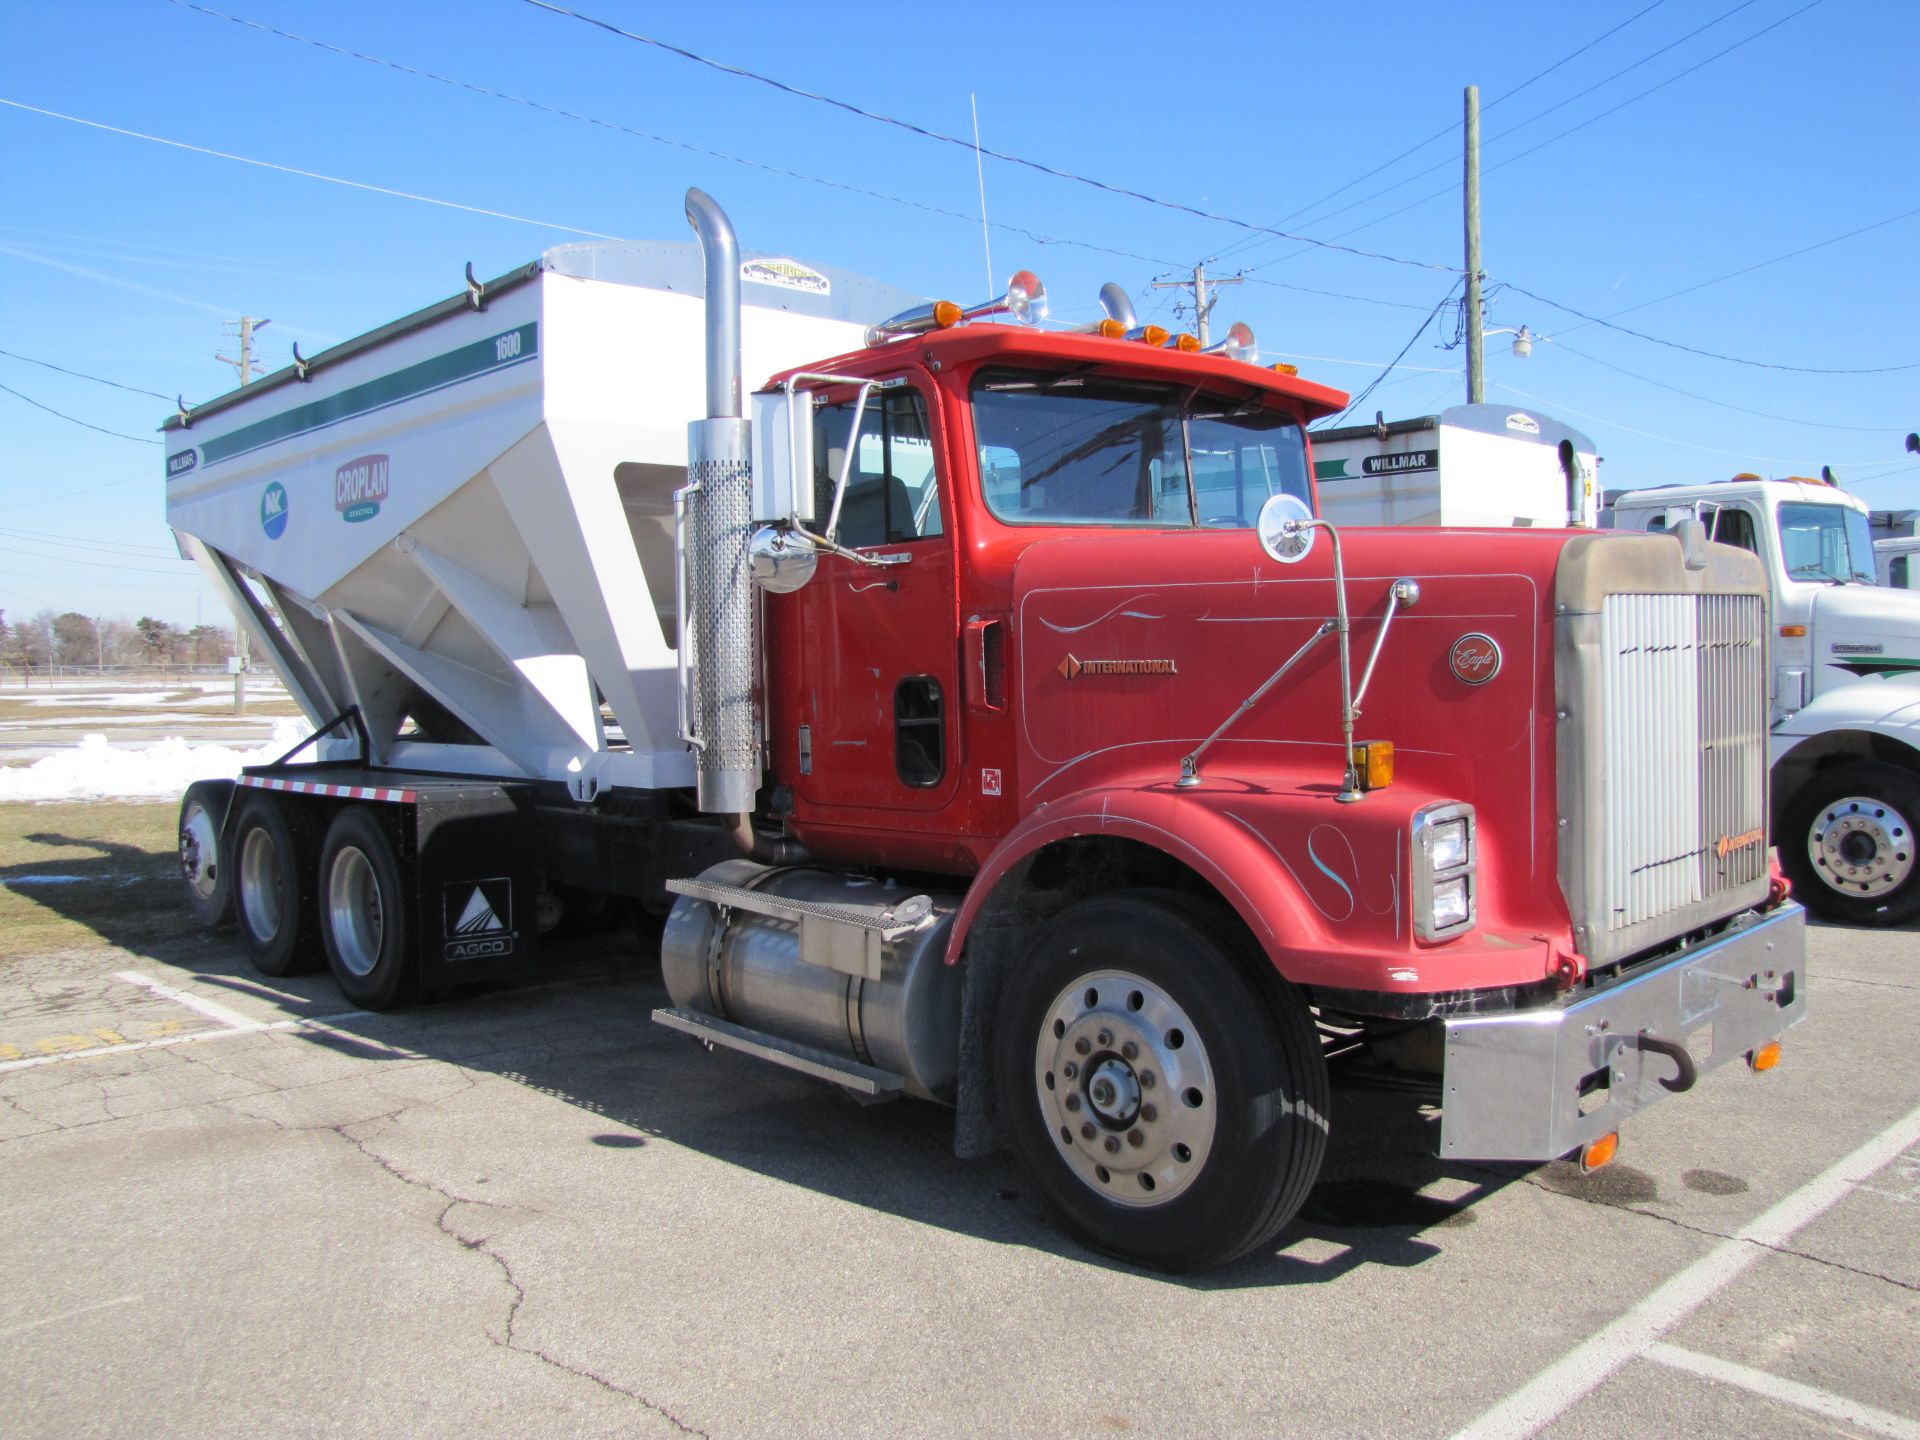 1988 International Eagle 9300, day cab, air ride, wet kit, Cat 3406P, Fuller 13-speed trans - Image 23 of 88